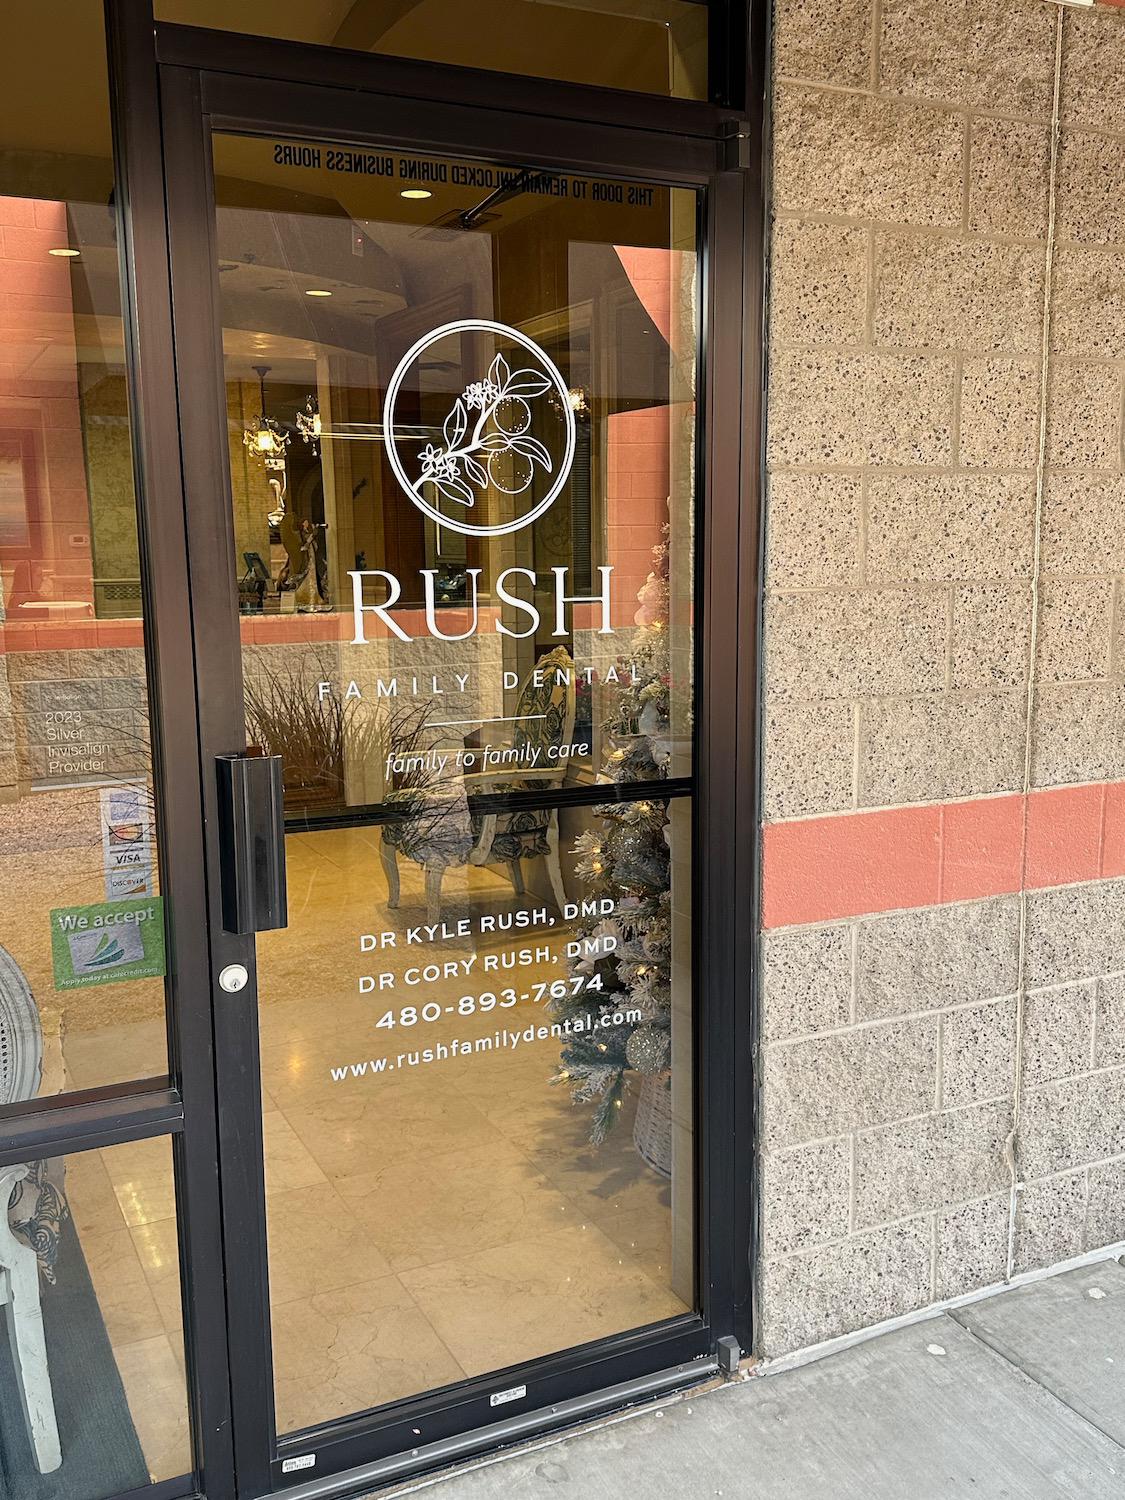 Rush Family Dental is a family-owned dental practice that has provided premium dental care for all a Rush Family Dental Phoenix (480)893-7674